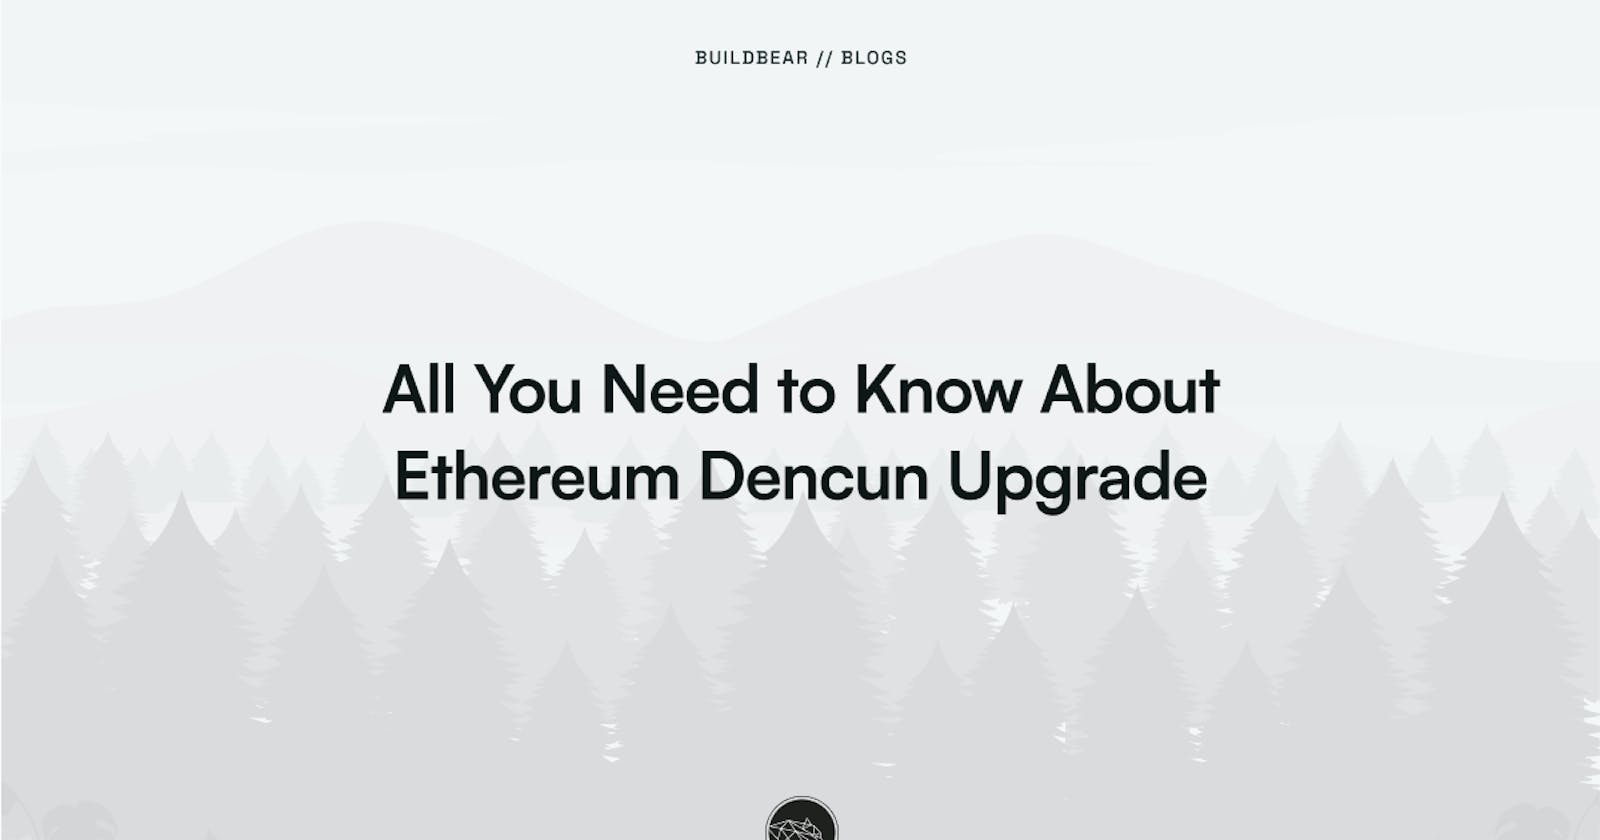 All You Need to Know about Ethereum Dencun Upgrade.